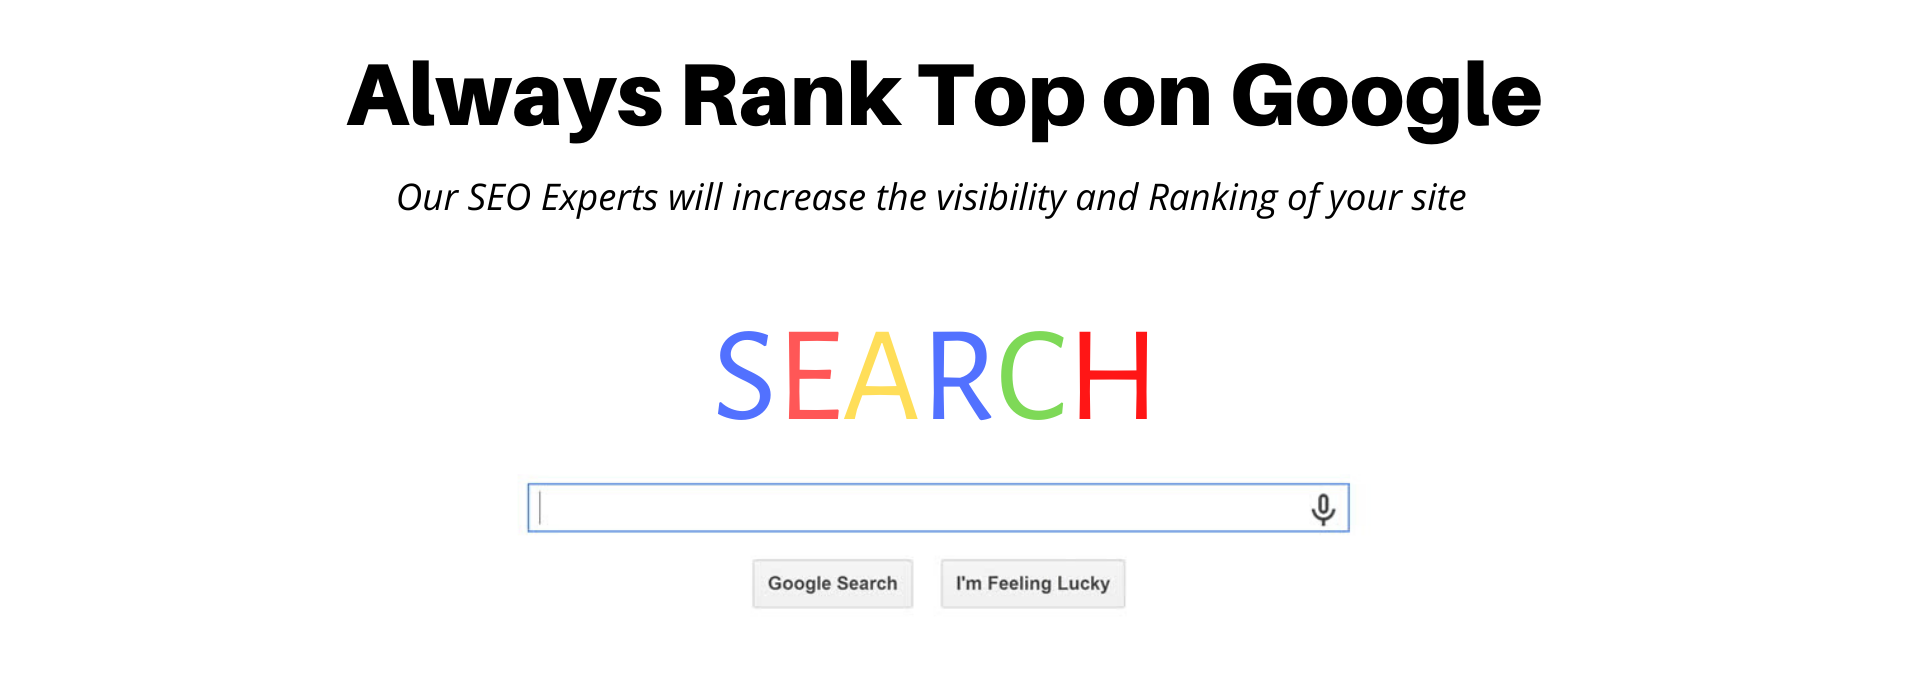 Always rank your website on top of search engine.Spurge media has best seo experts & consultants for your site ranking